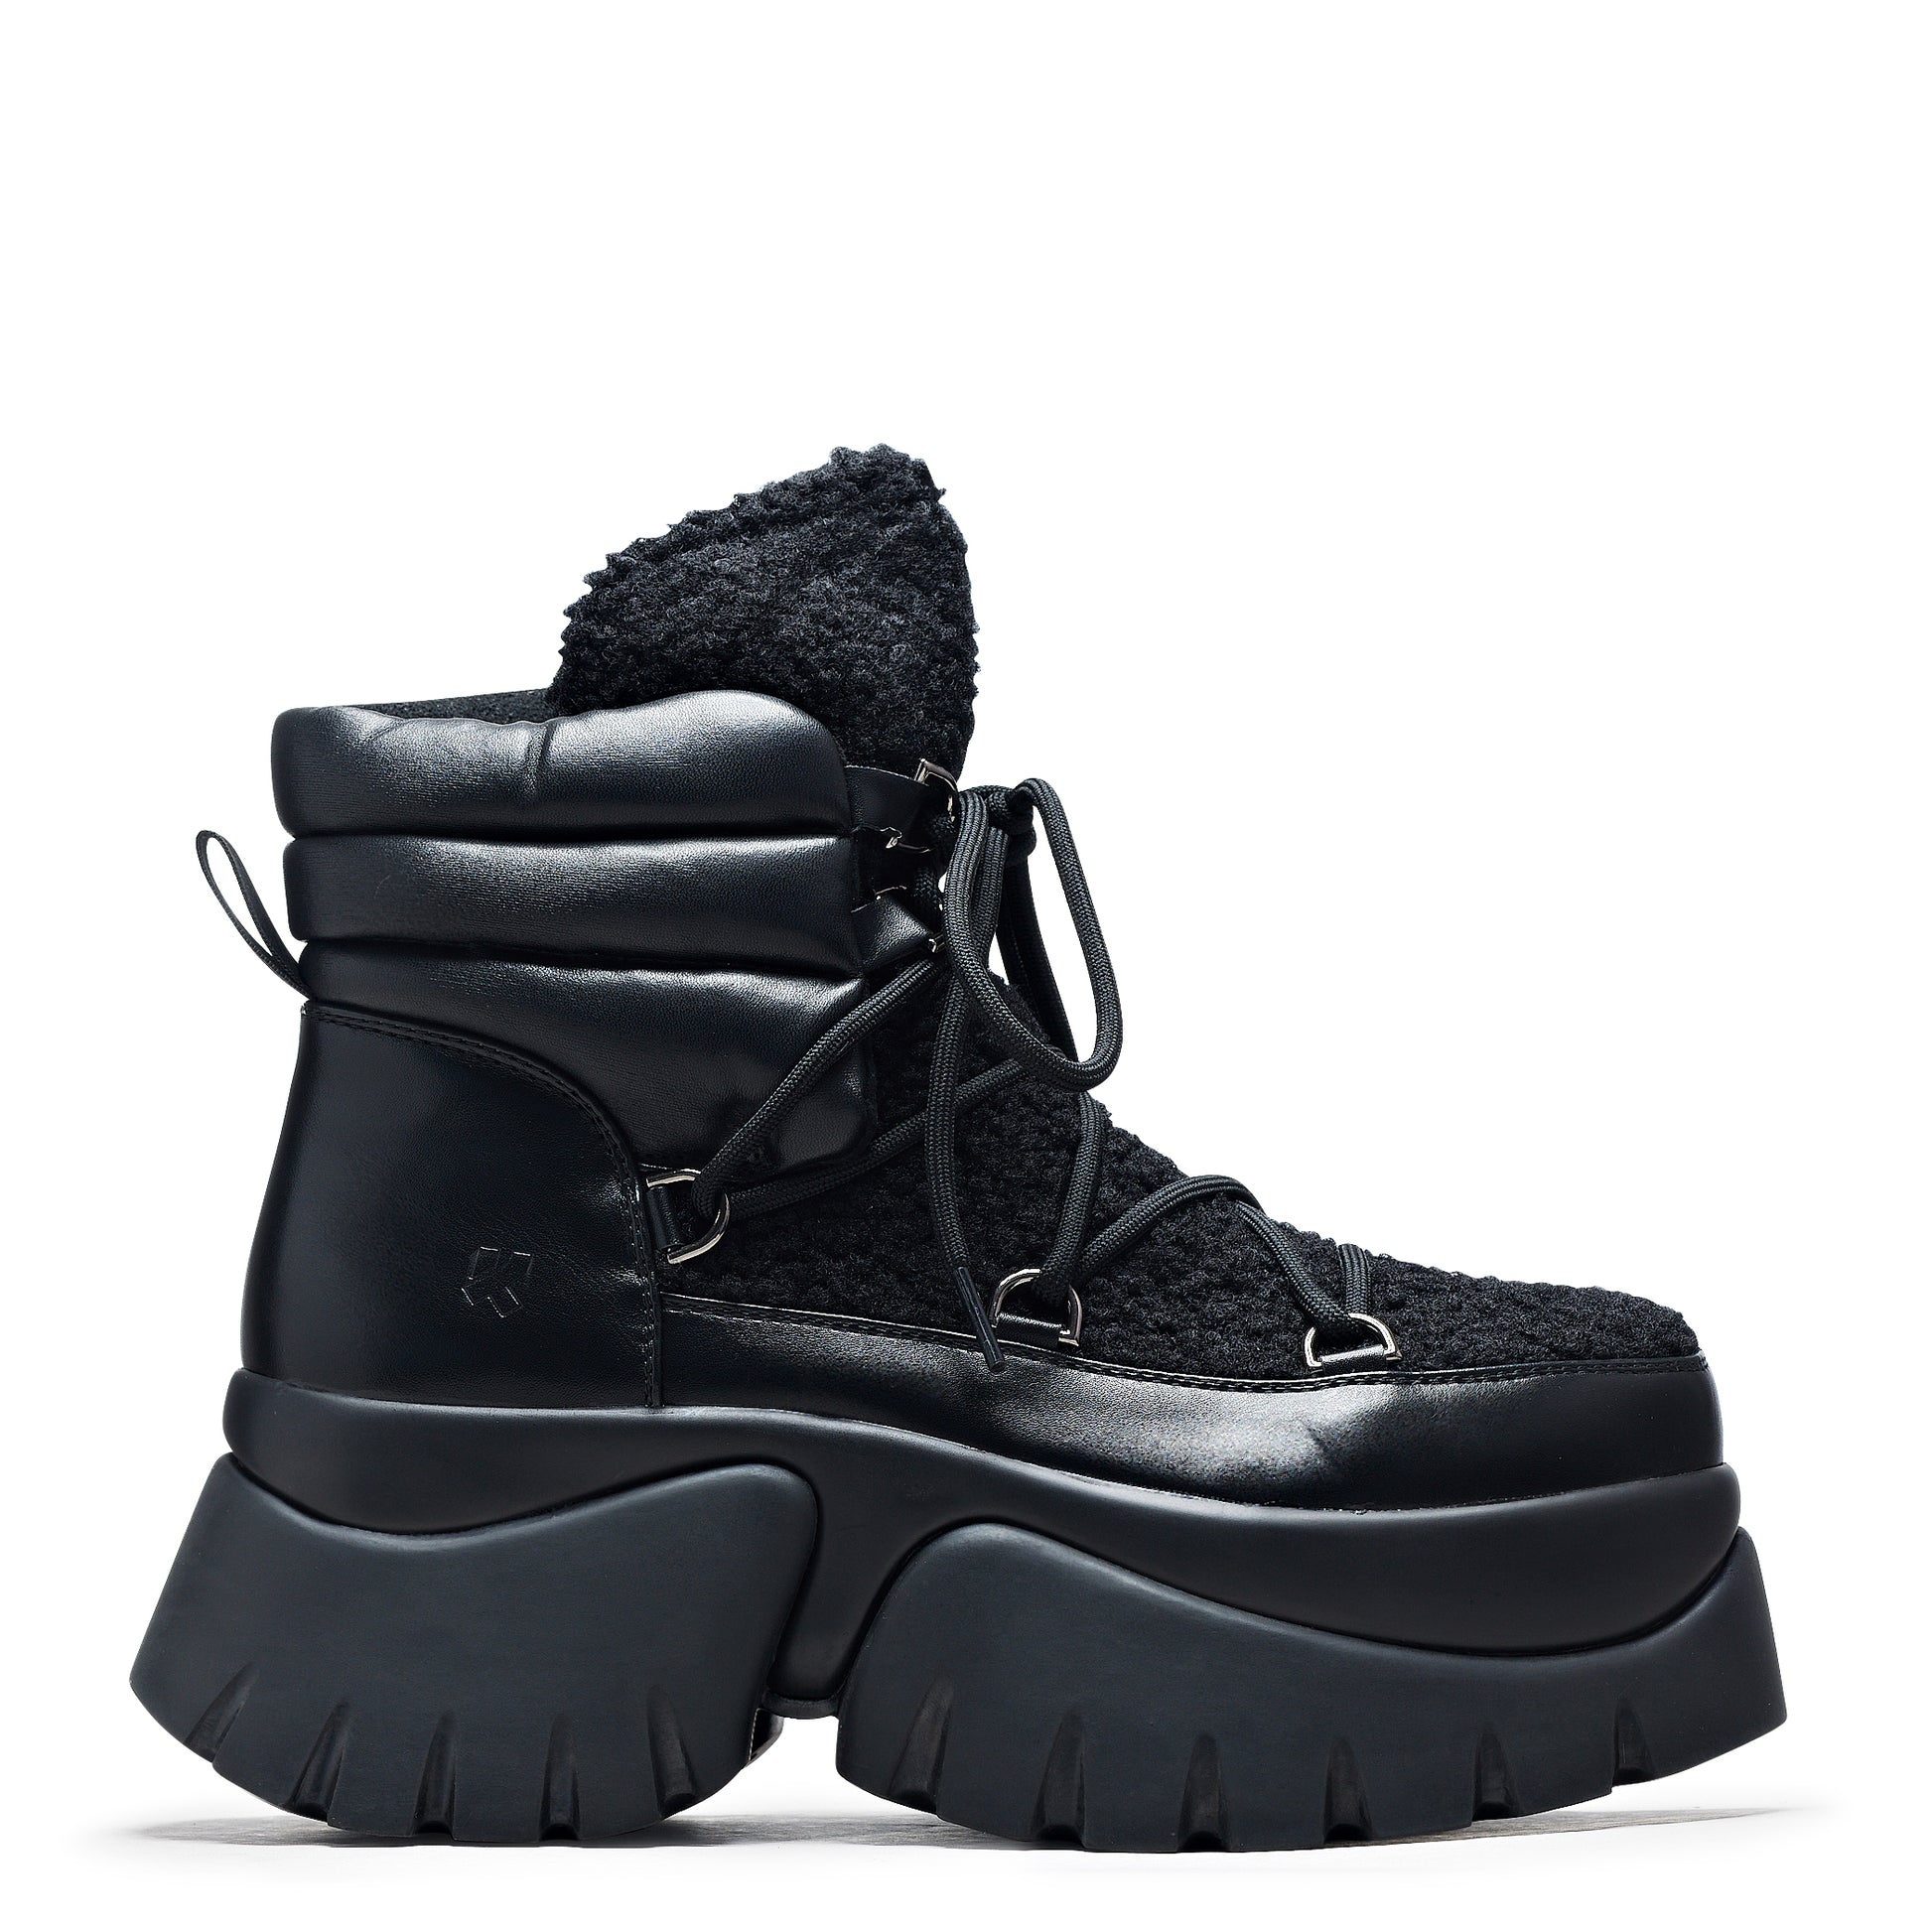 Black Fluffy Vilun Winter Boots - Ankle Boots - KOI Footwear - Black - Side View